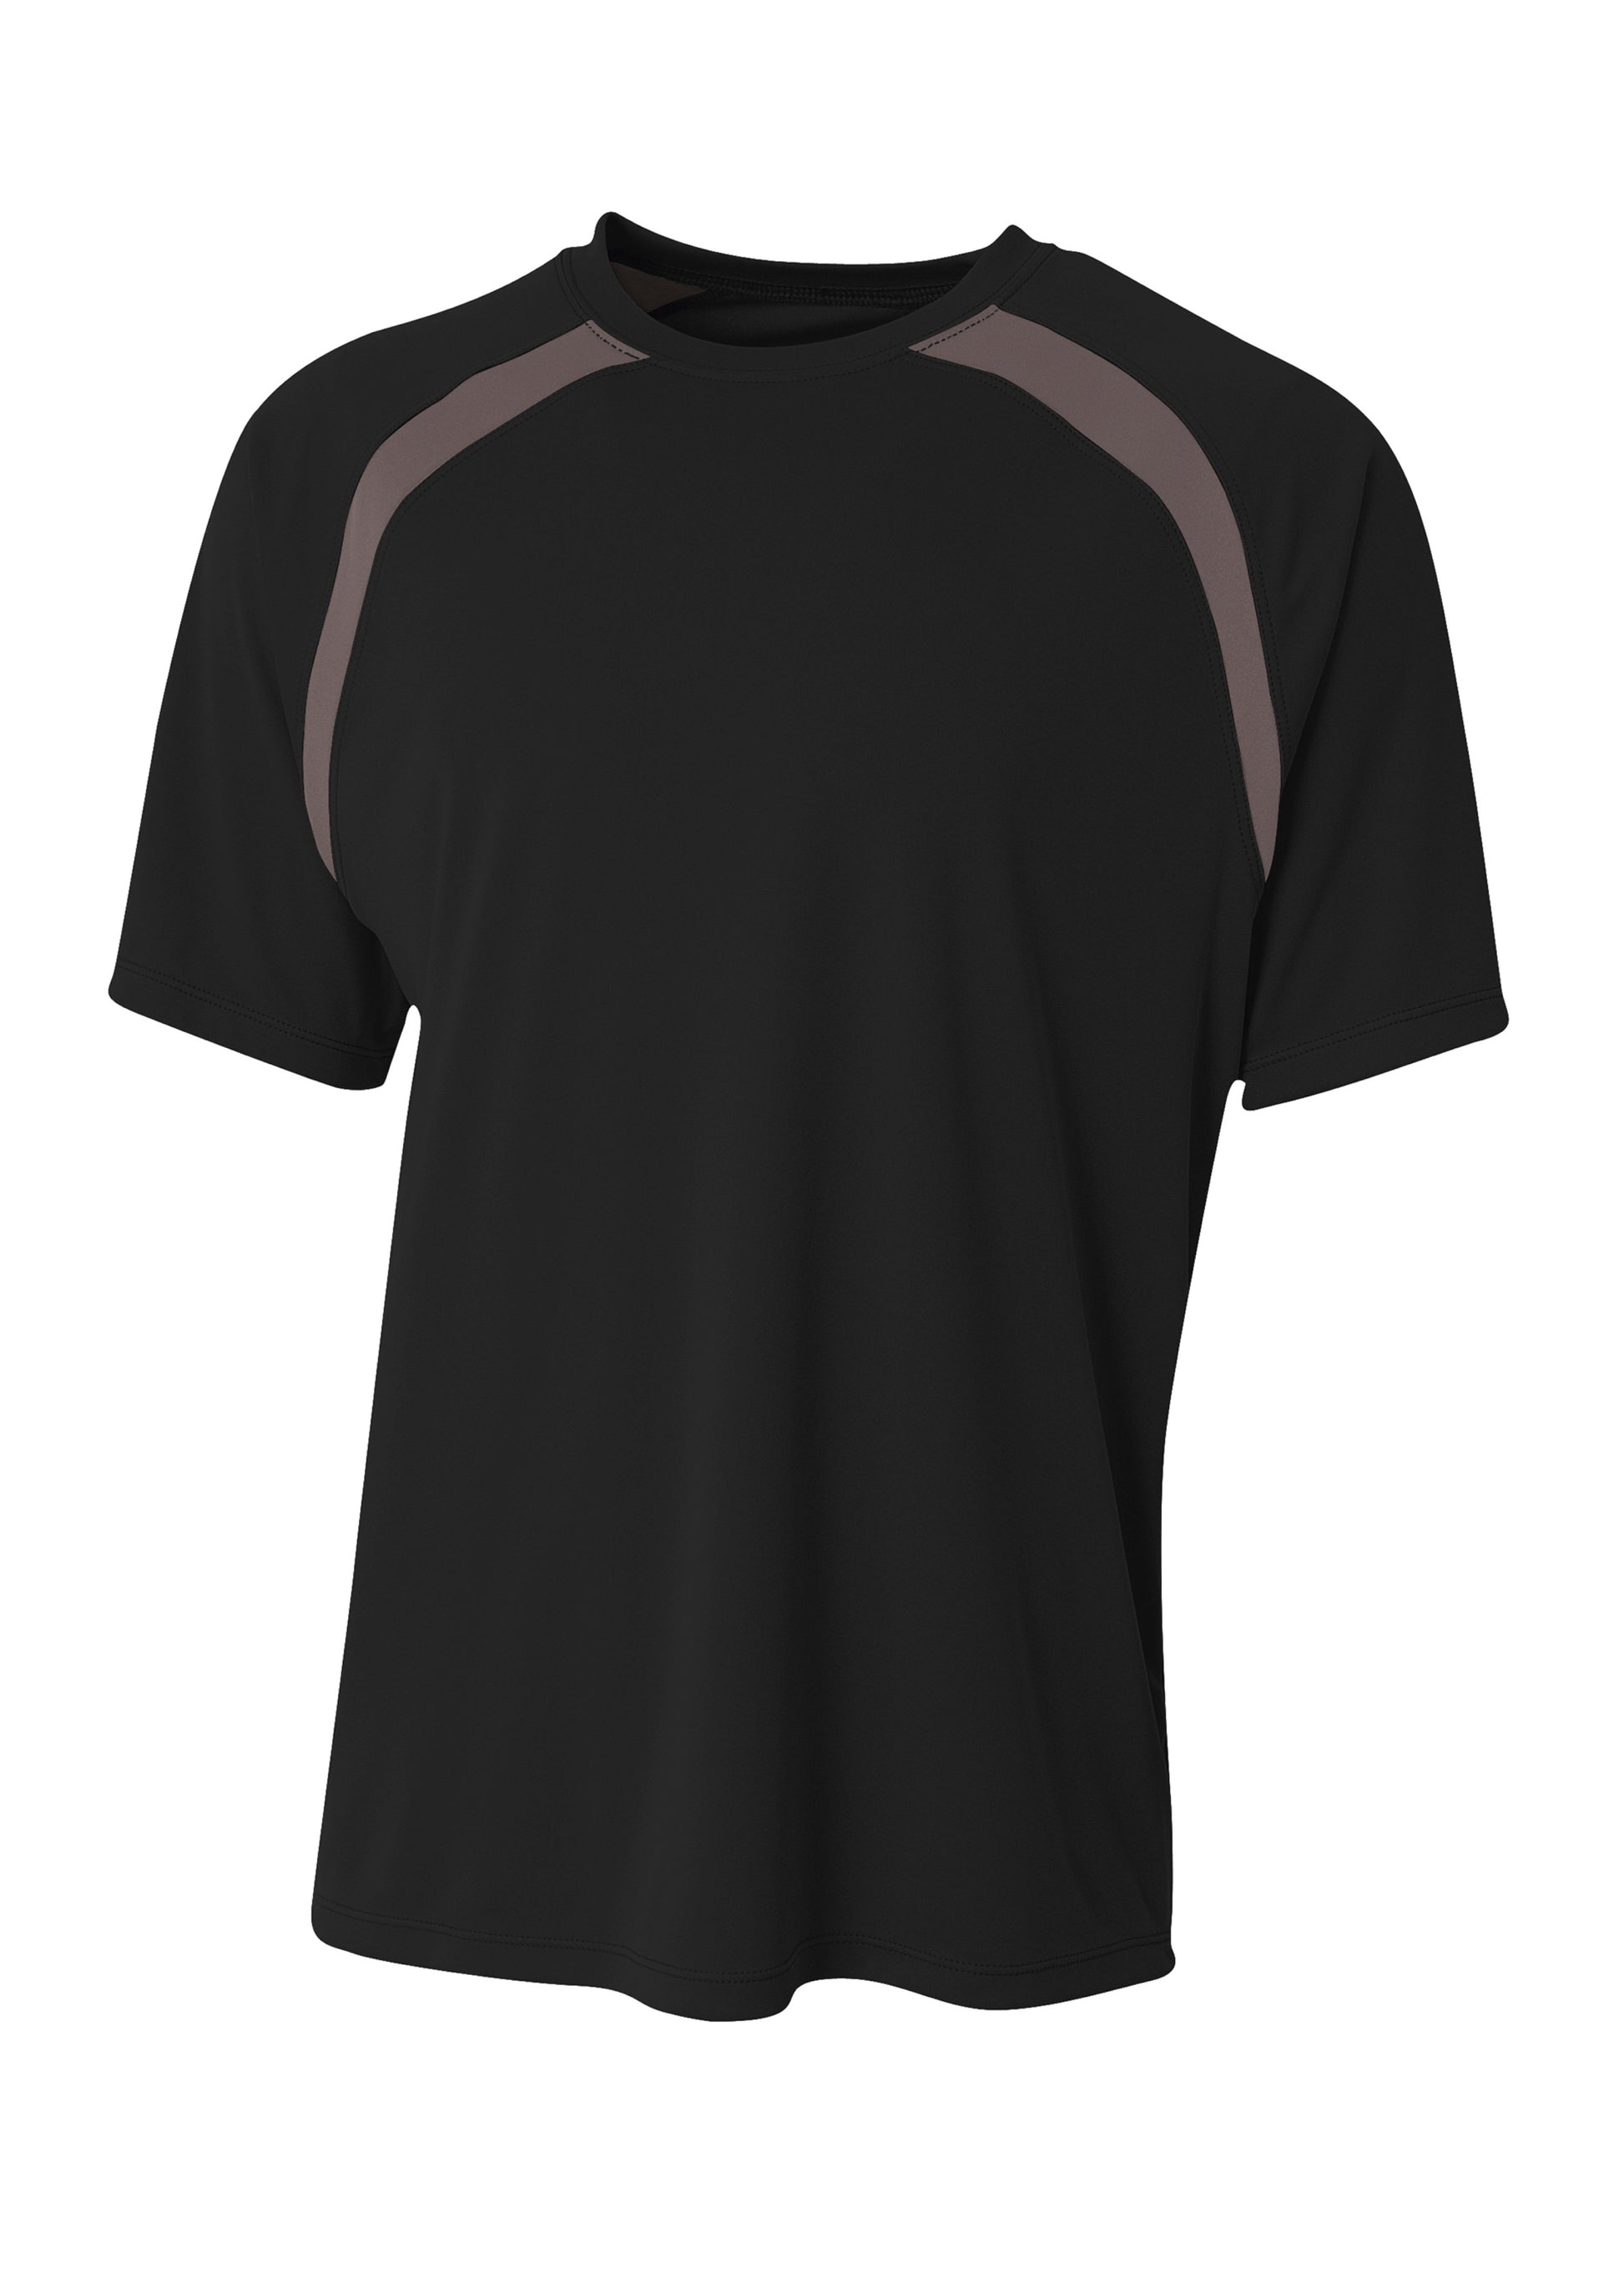 Photo of A4 SHIRTS NB3001  color  BLACK/GRAPHITE